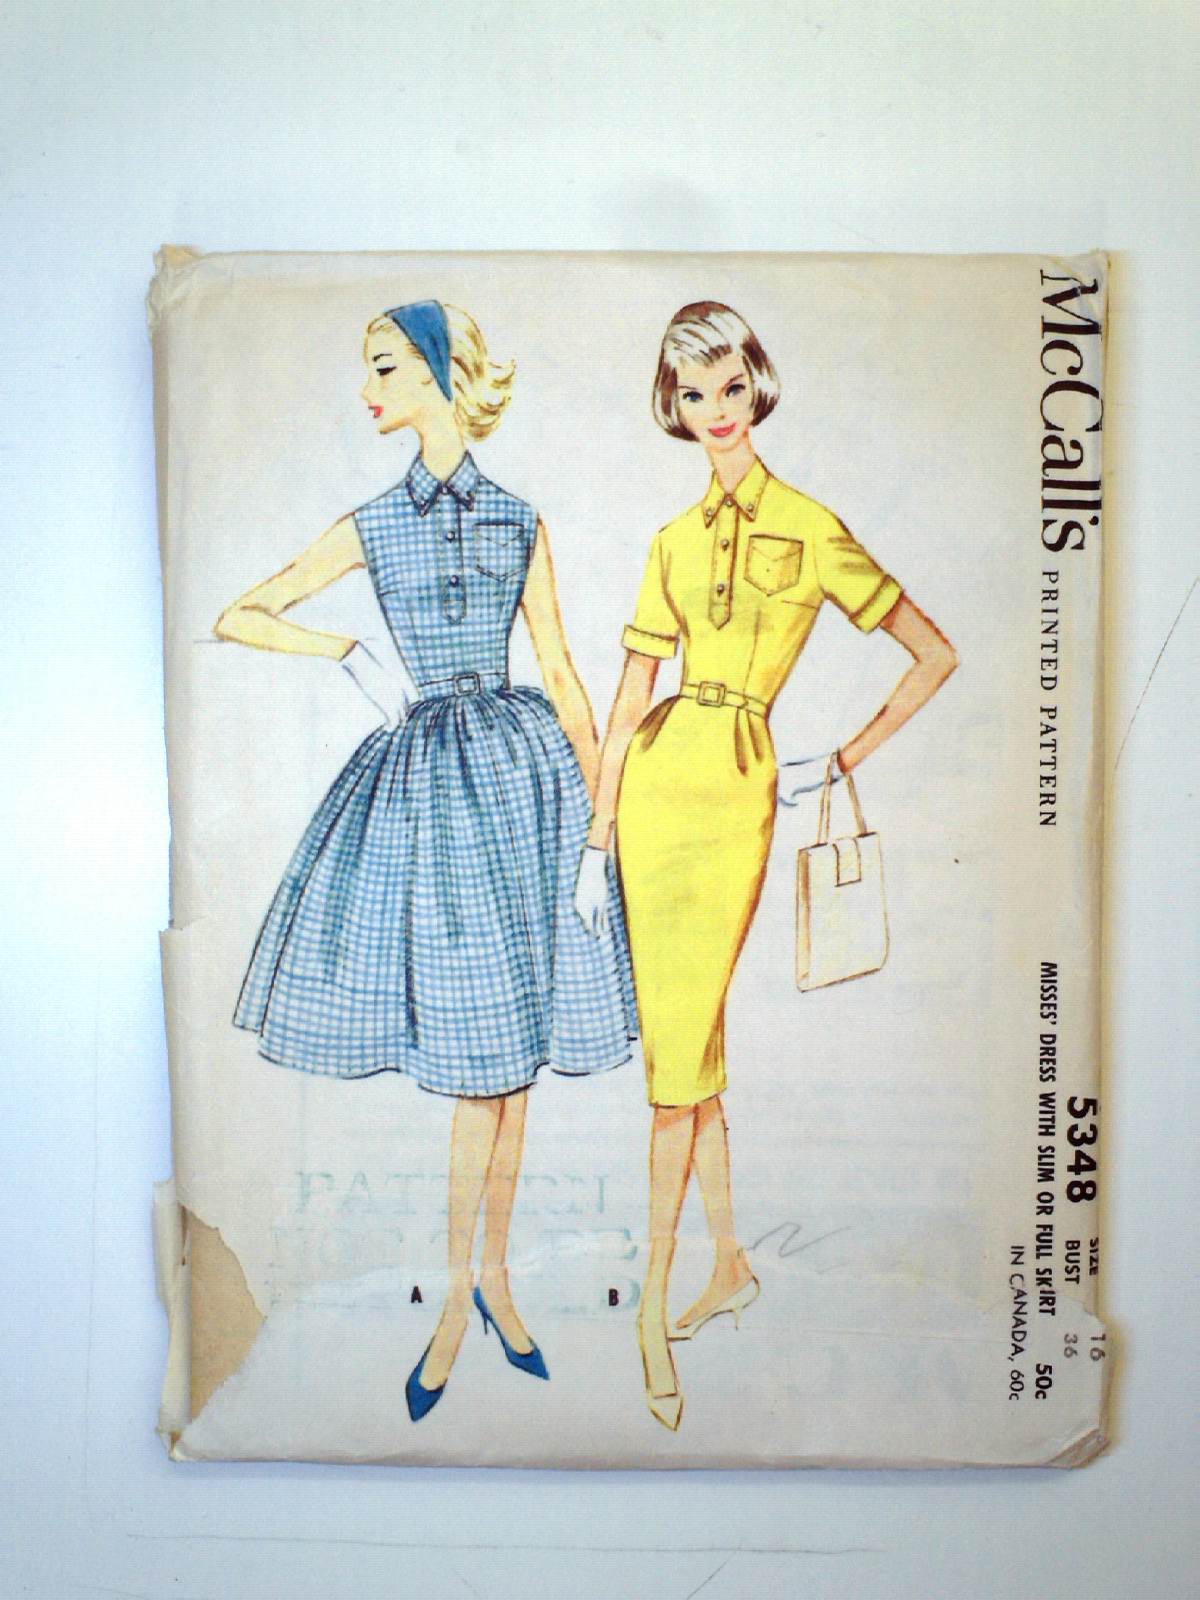 Vintage 70s Gored Skirt Sewing Pattern Kandel Patterns for Knits 60 Three  Styles Sizes 6 to 20 Waist 26 Hips 35 UNCUT FF - Etsy